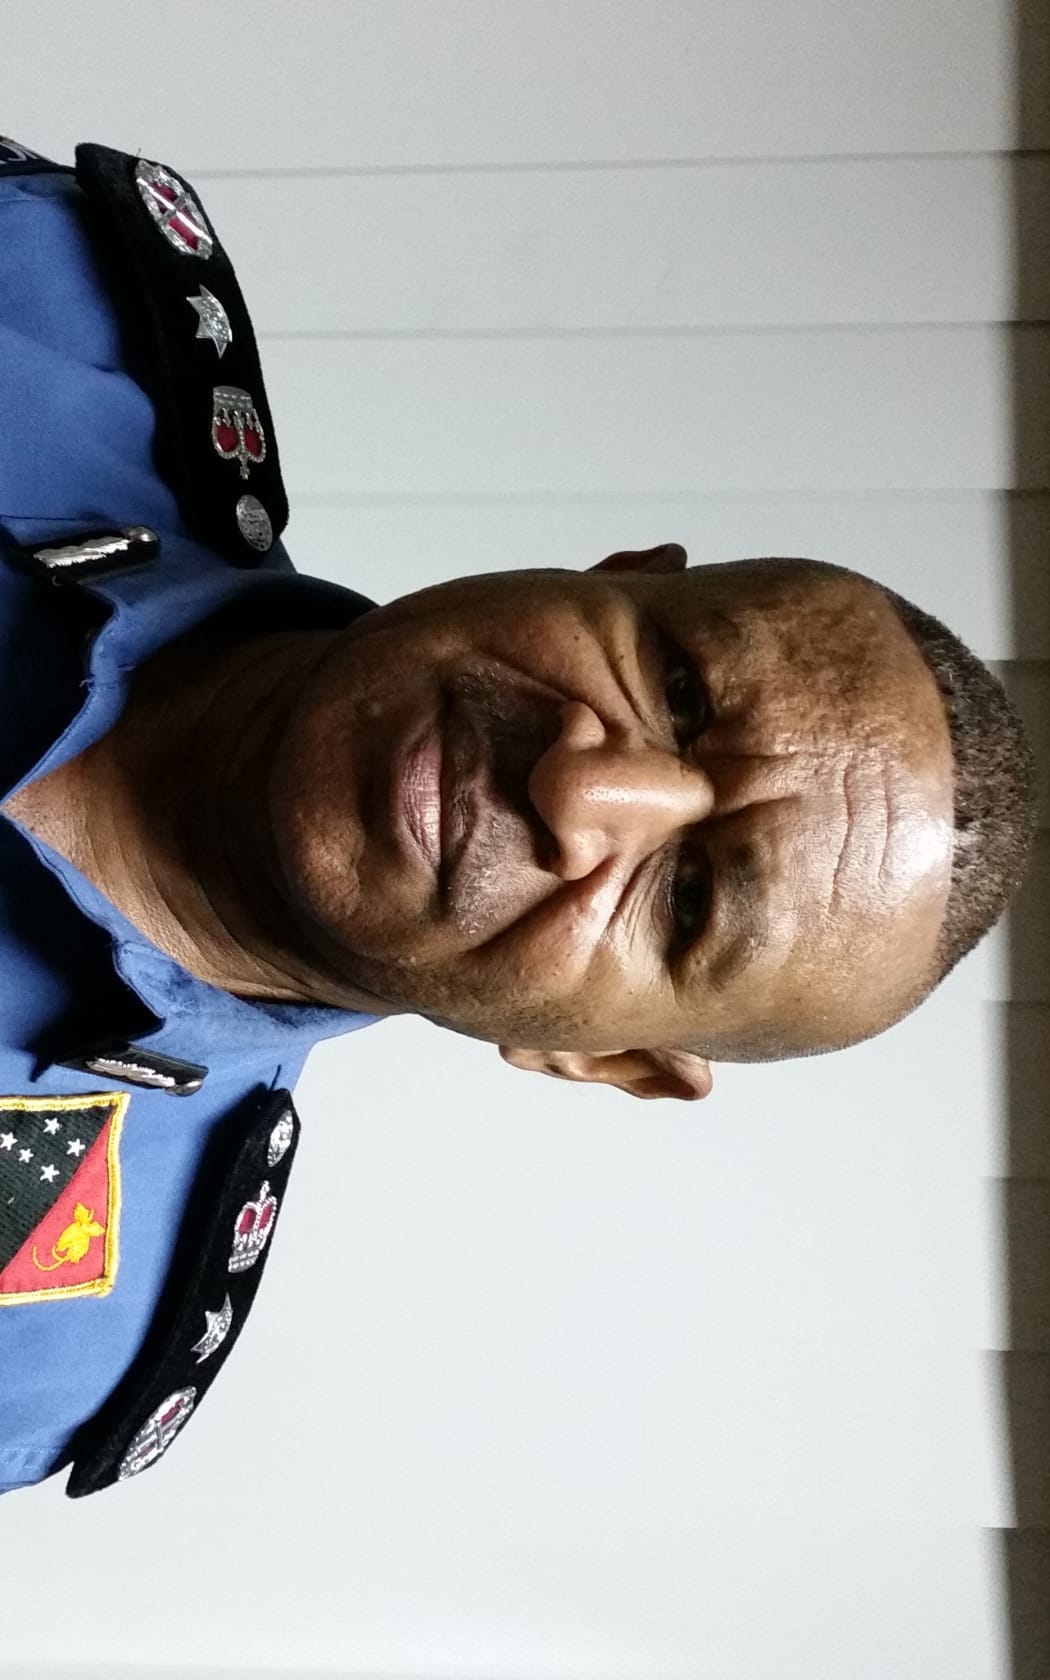 The Police Commissioner of Papua New Guinea, Geoffrey Vaki.